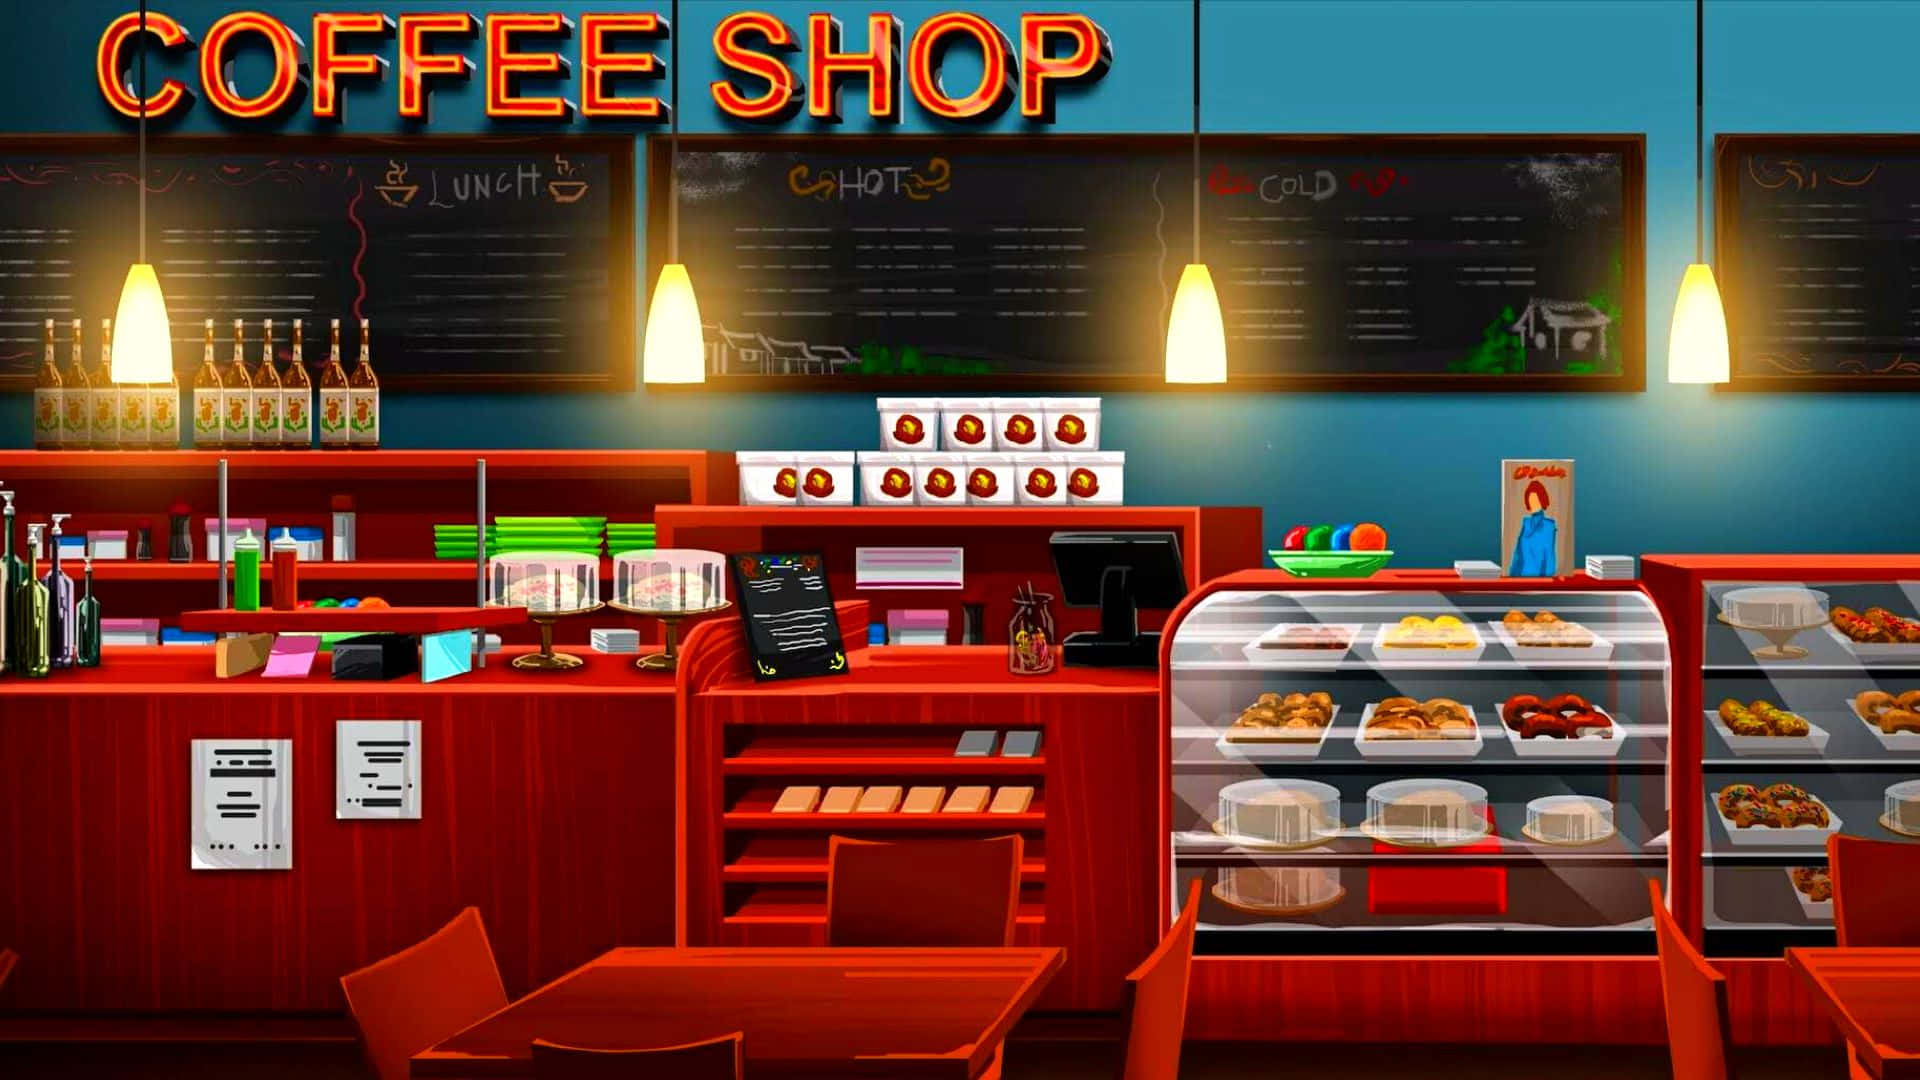 200+] Coffee Shop Background s 